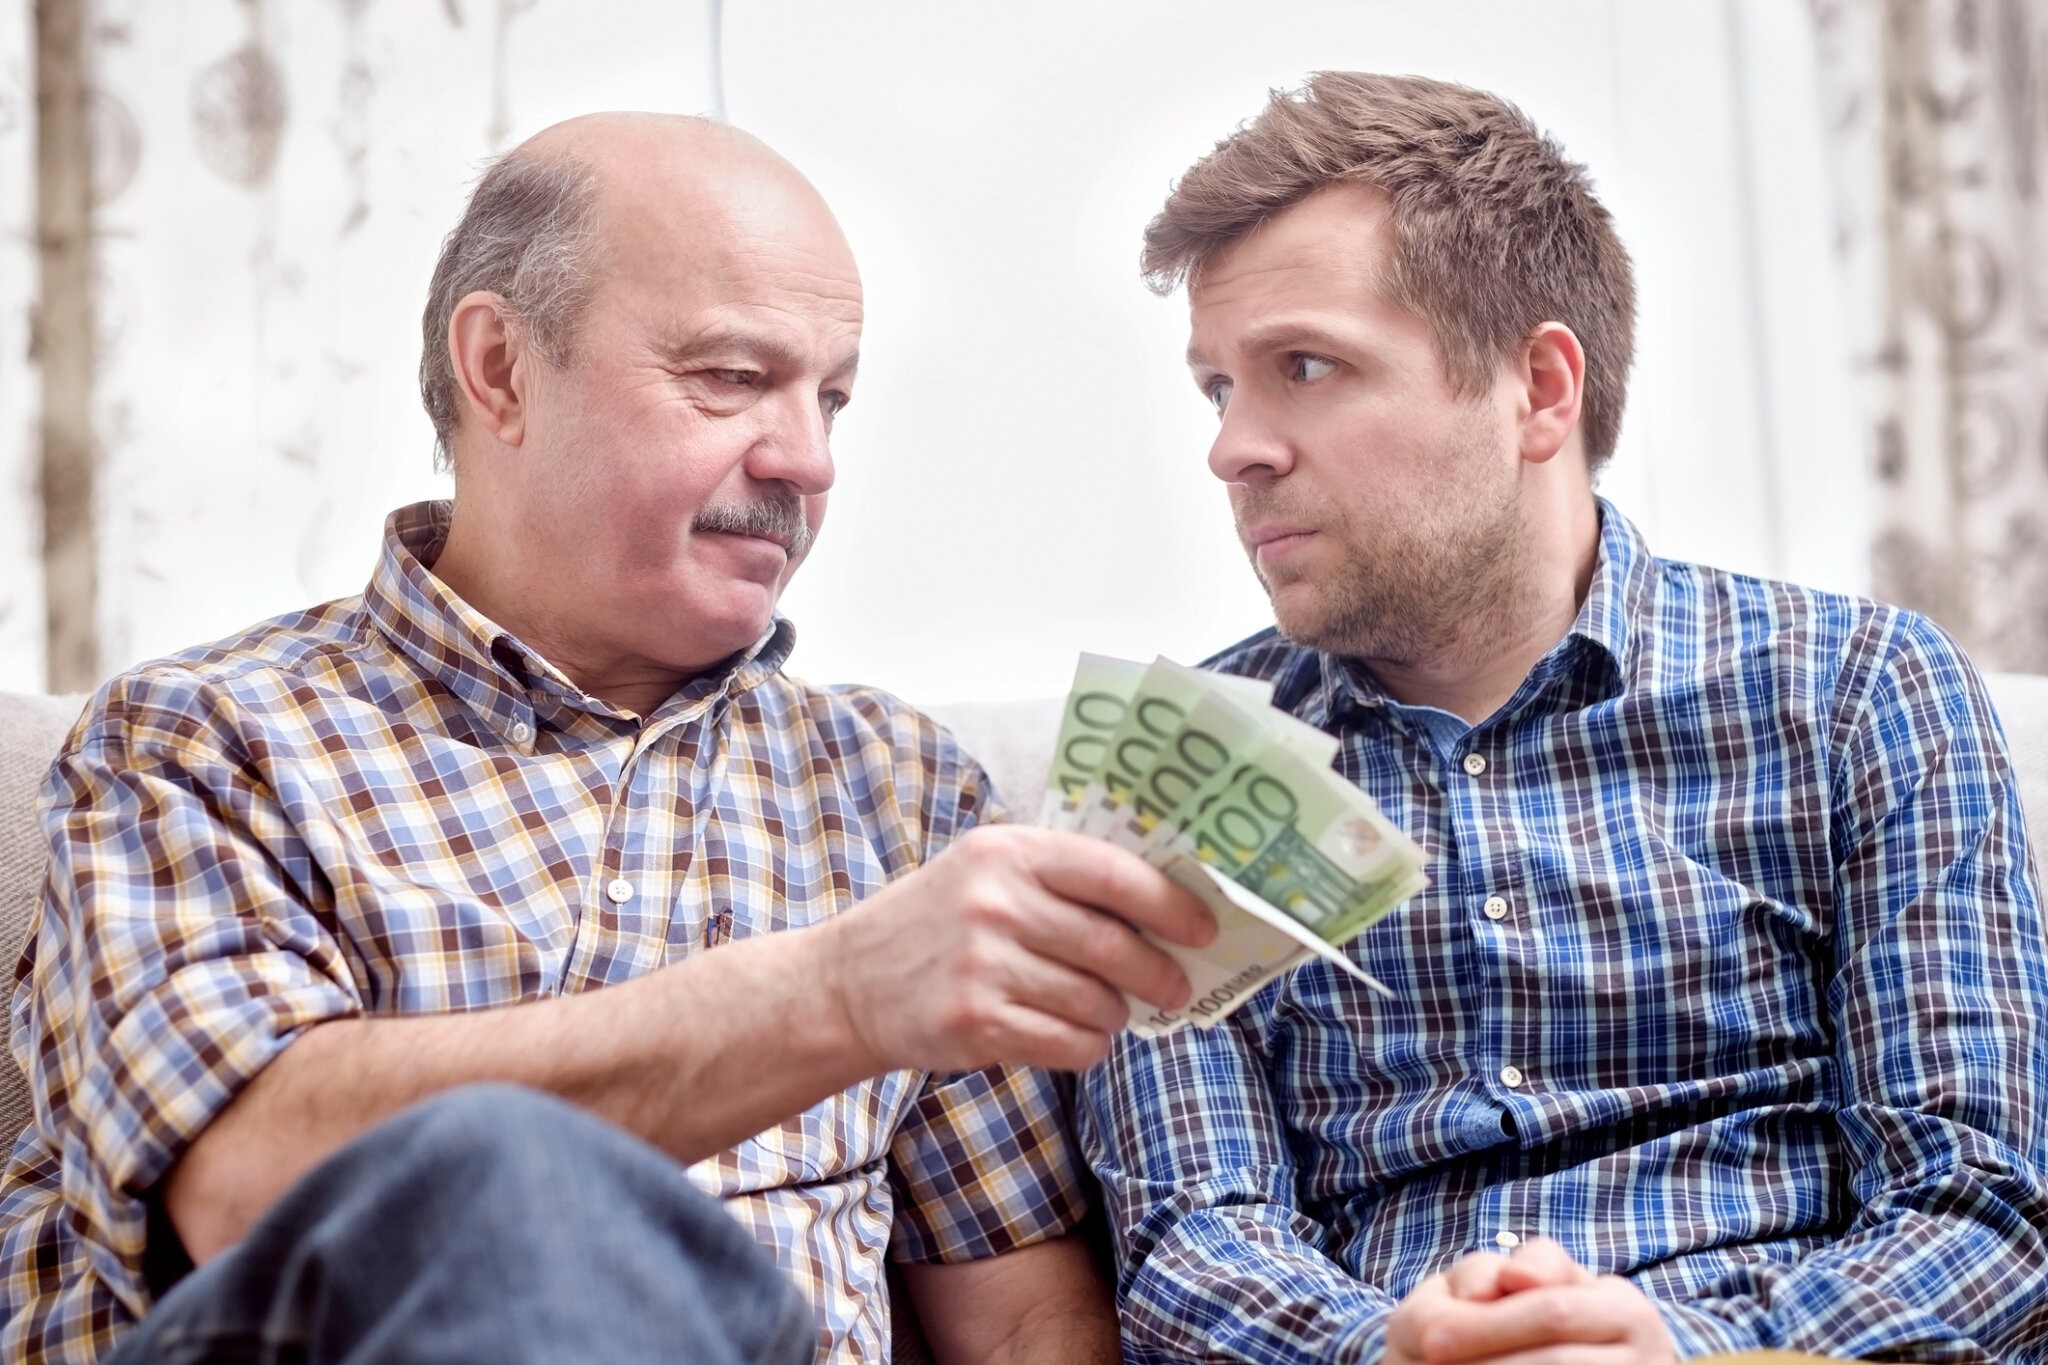 Elderly father lends money to his adult child son. He helps his child deal with financial problems.